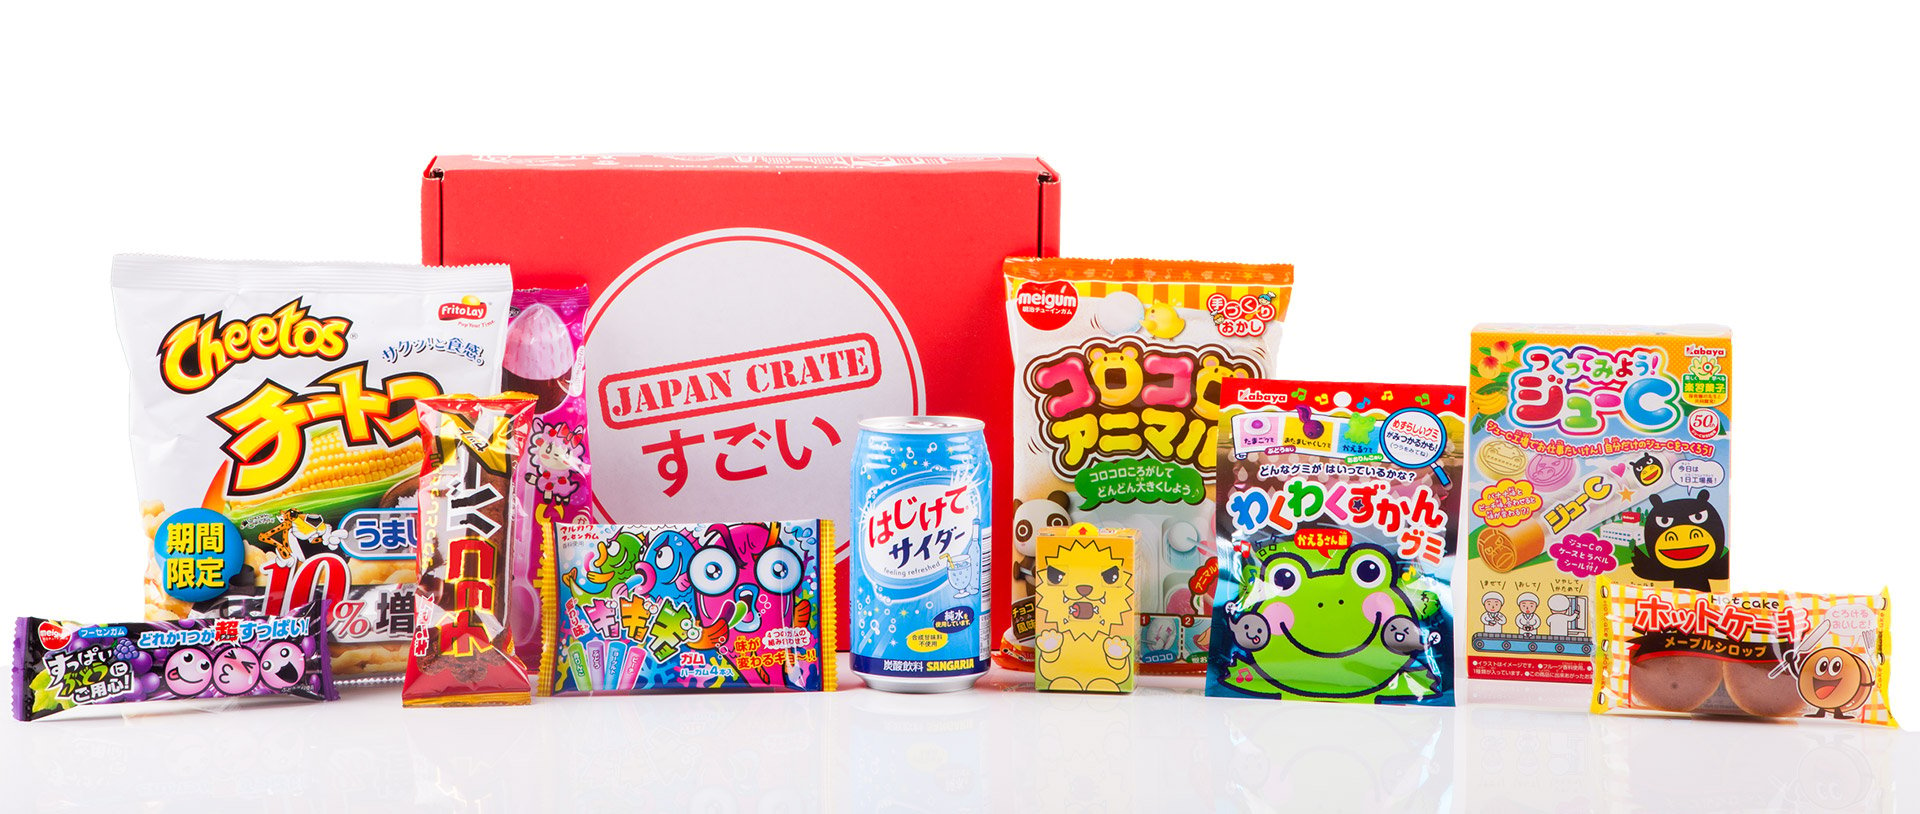 Win: Japan Crate Candy Subscription